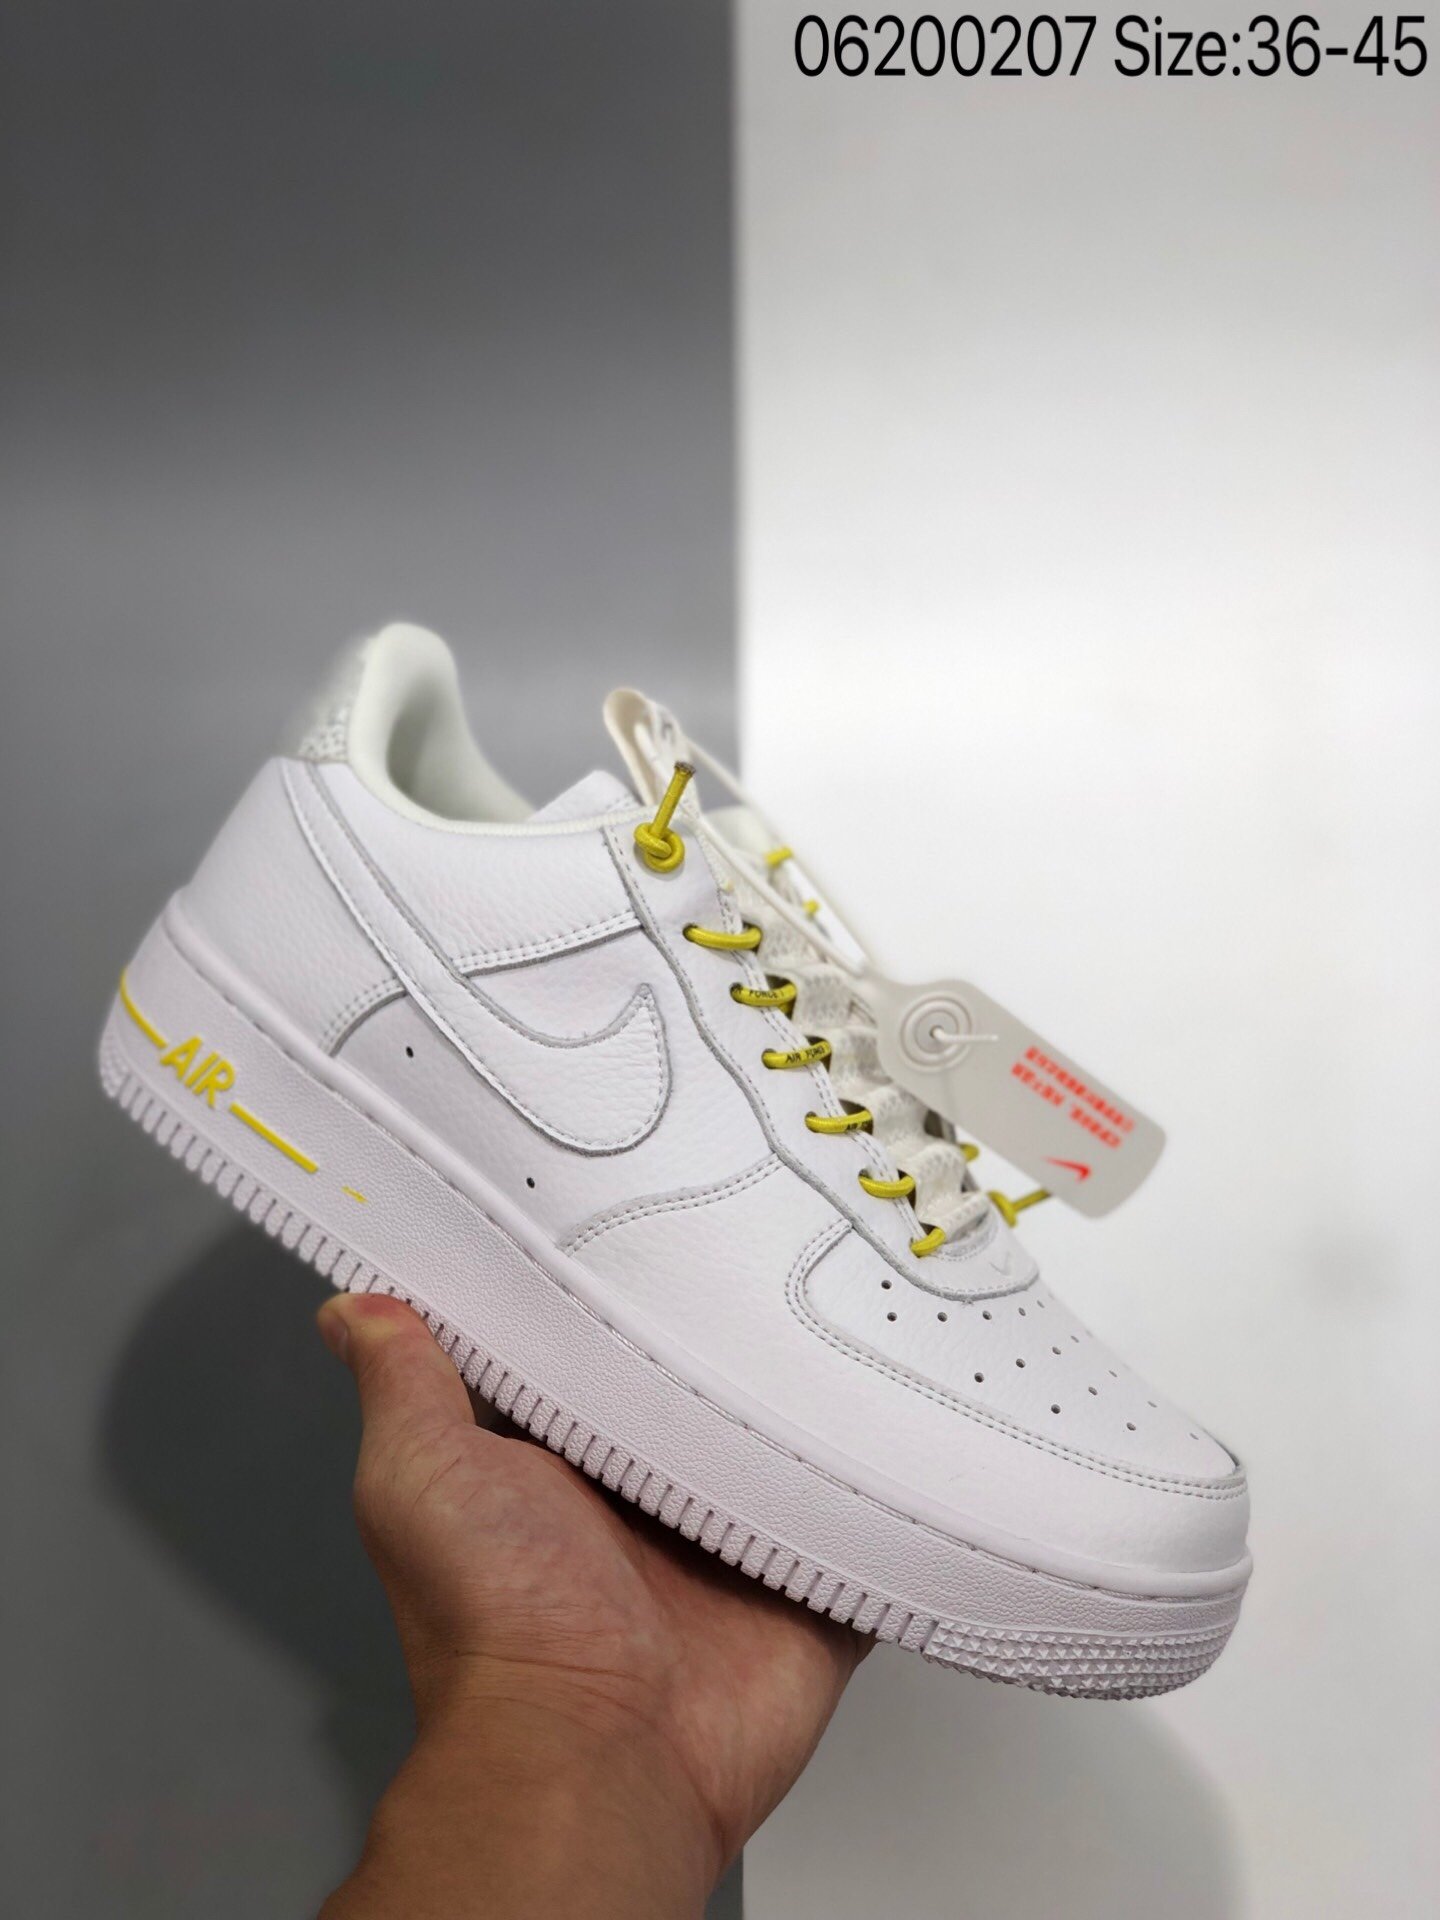 do air force ones run true to size